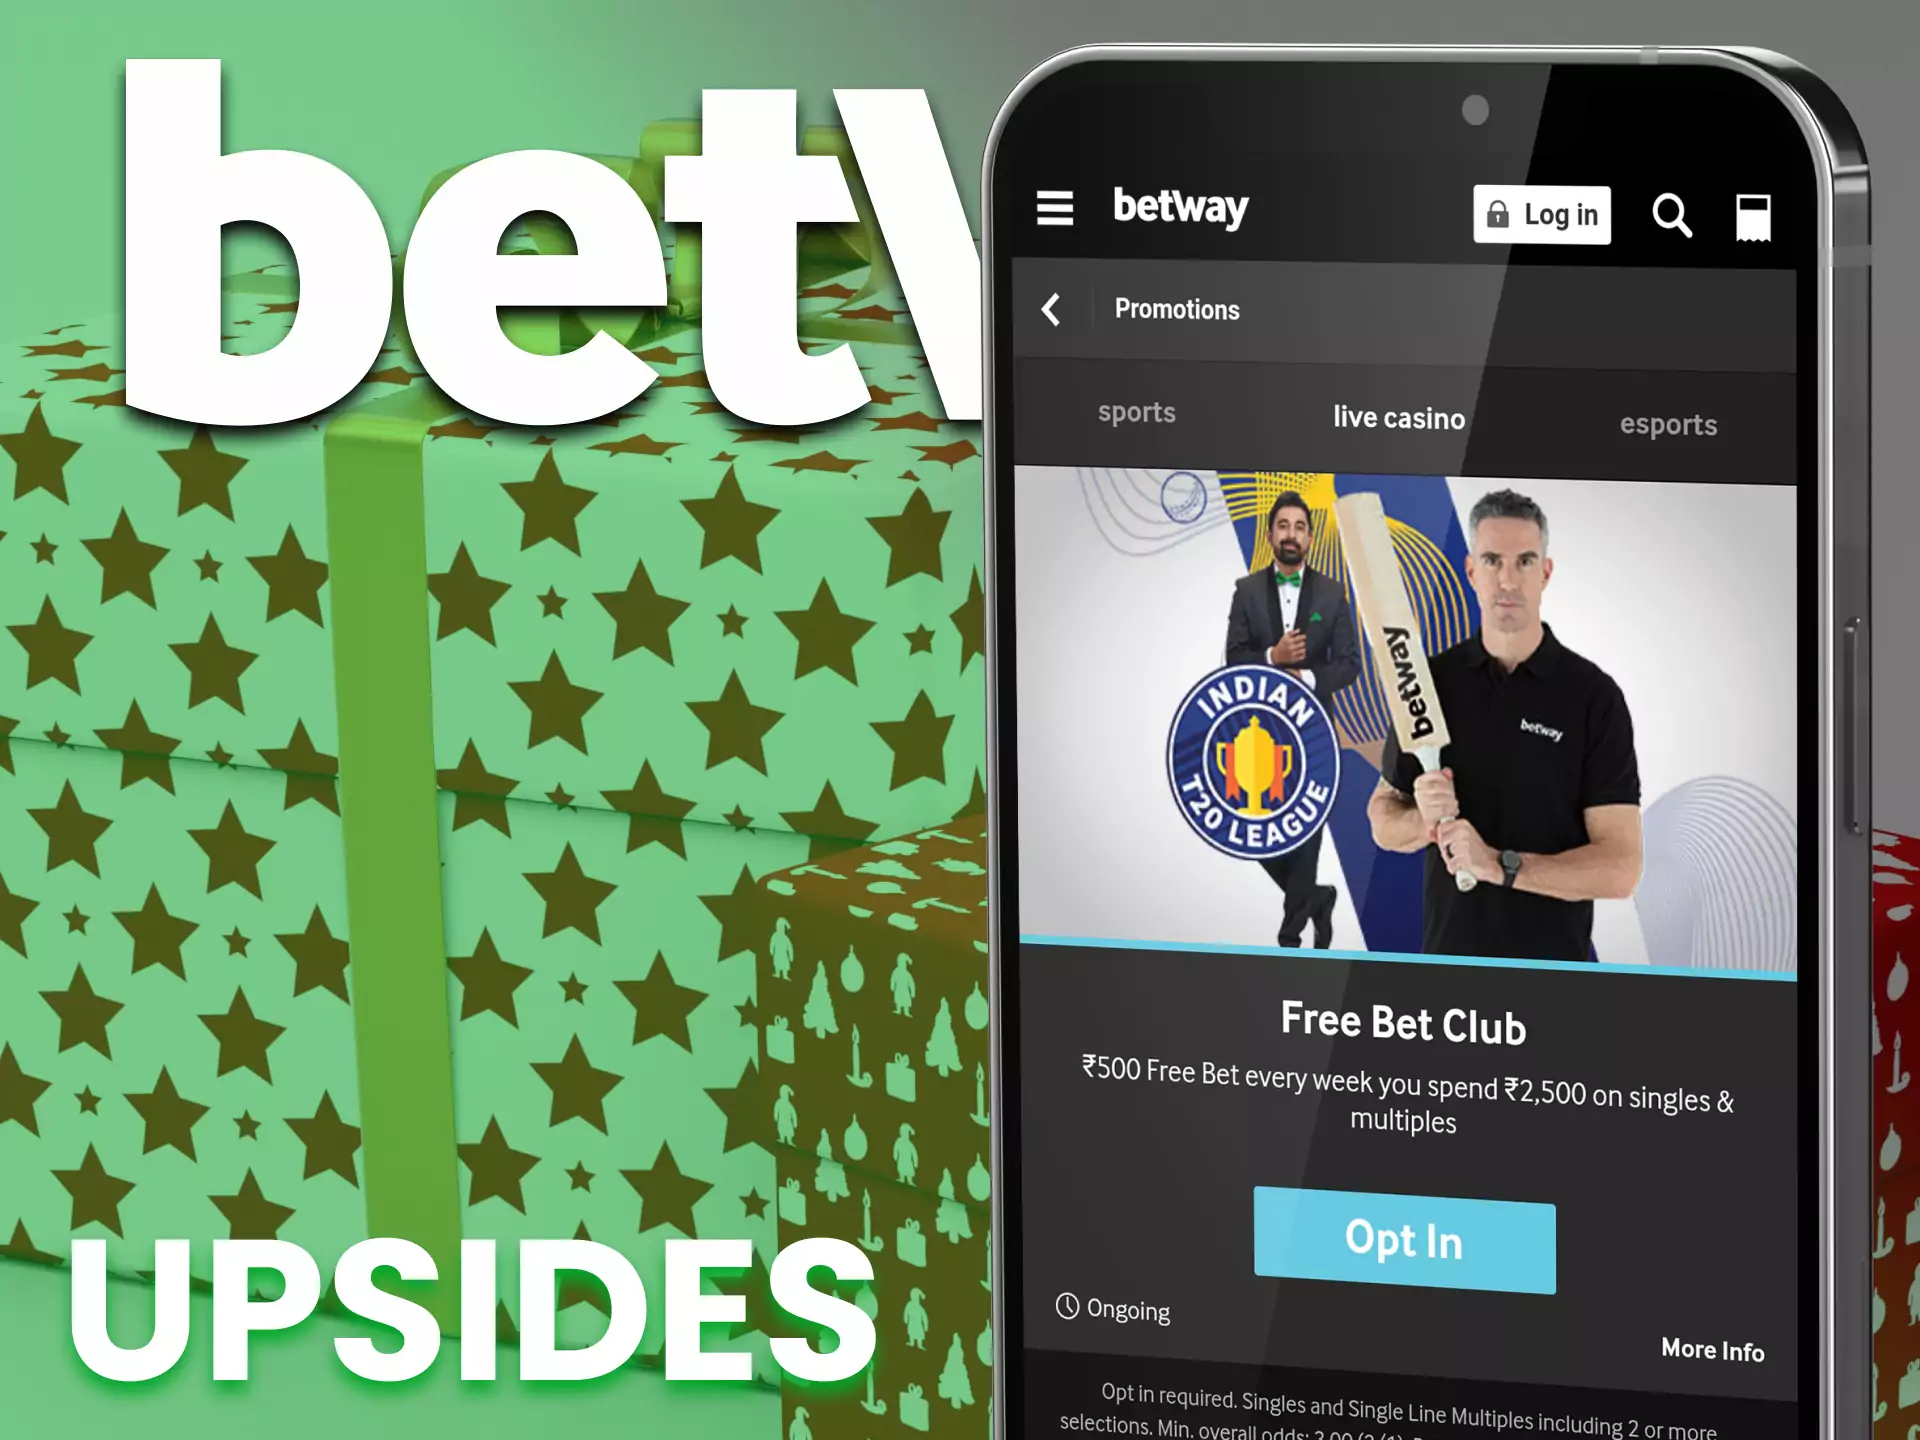 Betway has a lot of upsides, read more about them.